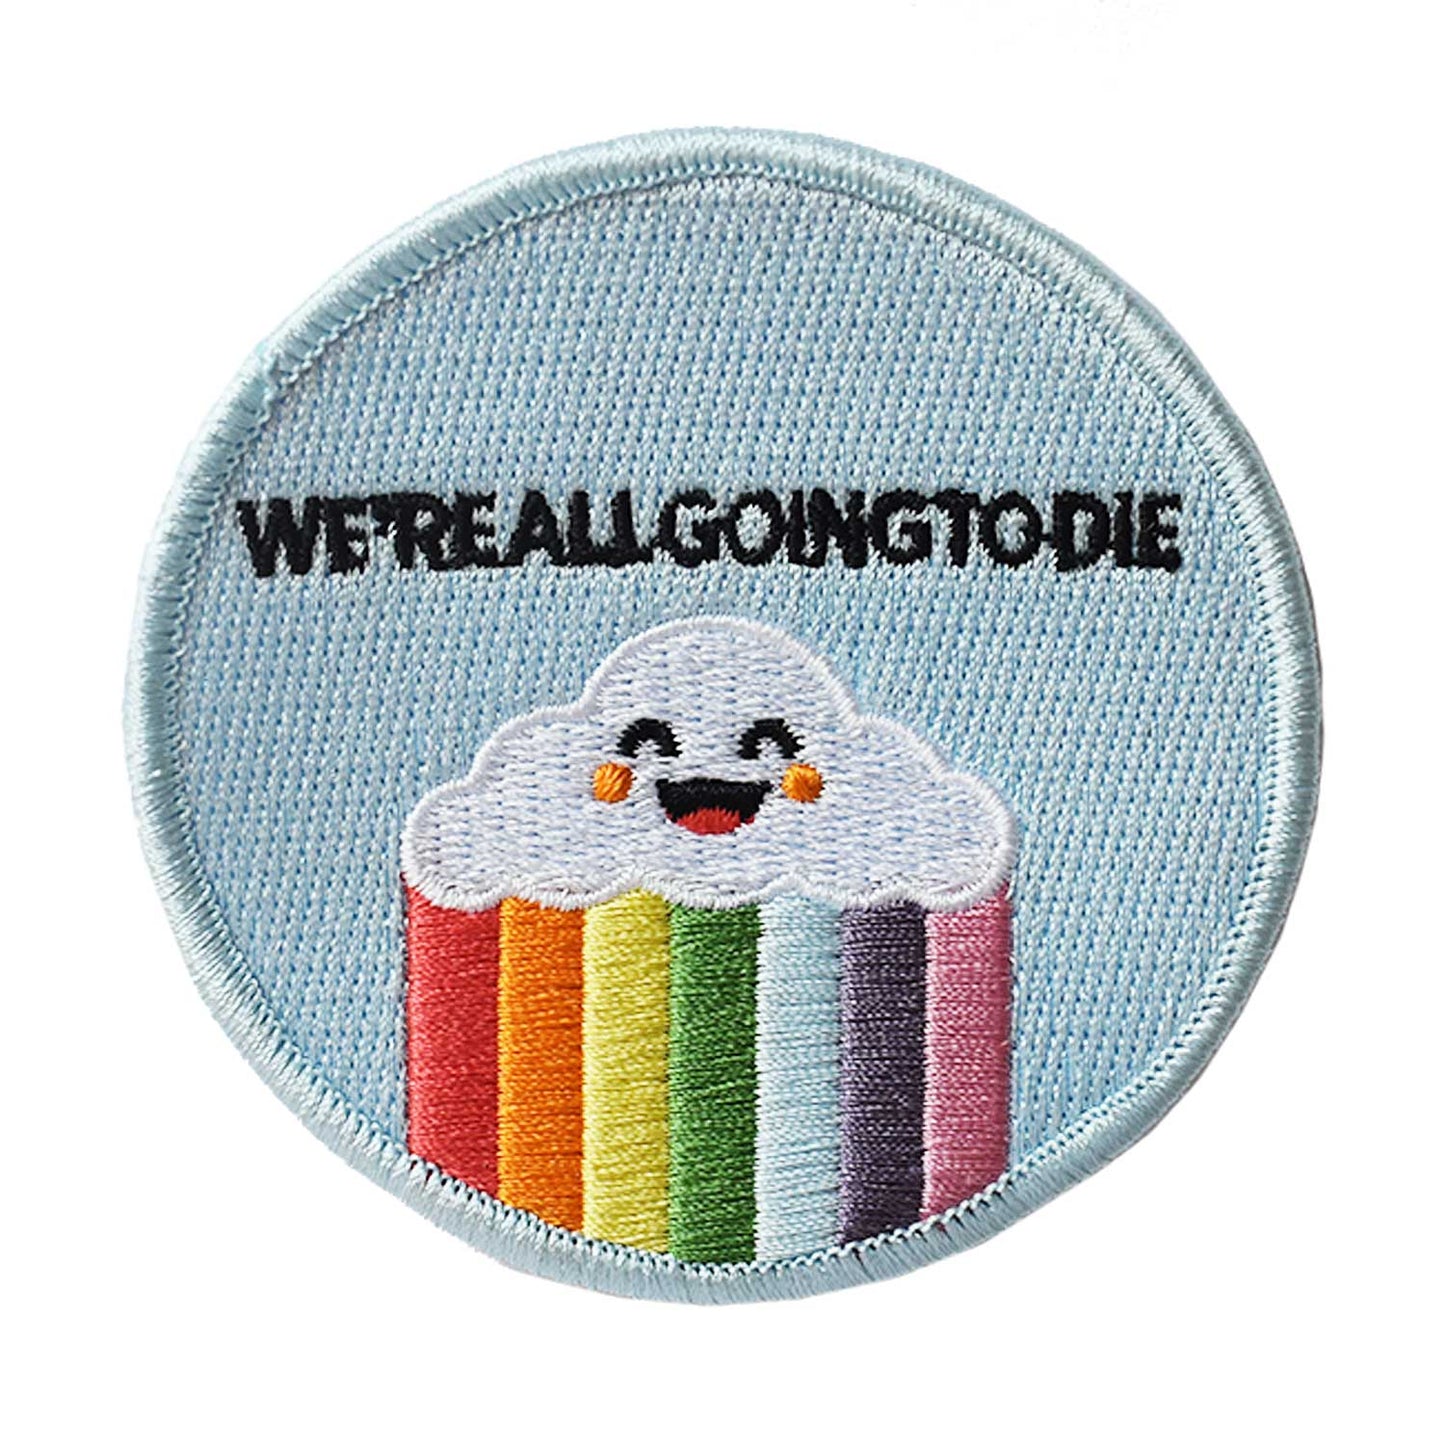 We're All Going to Die | Embroidered Patch